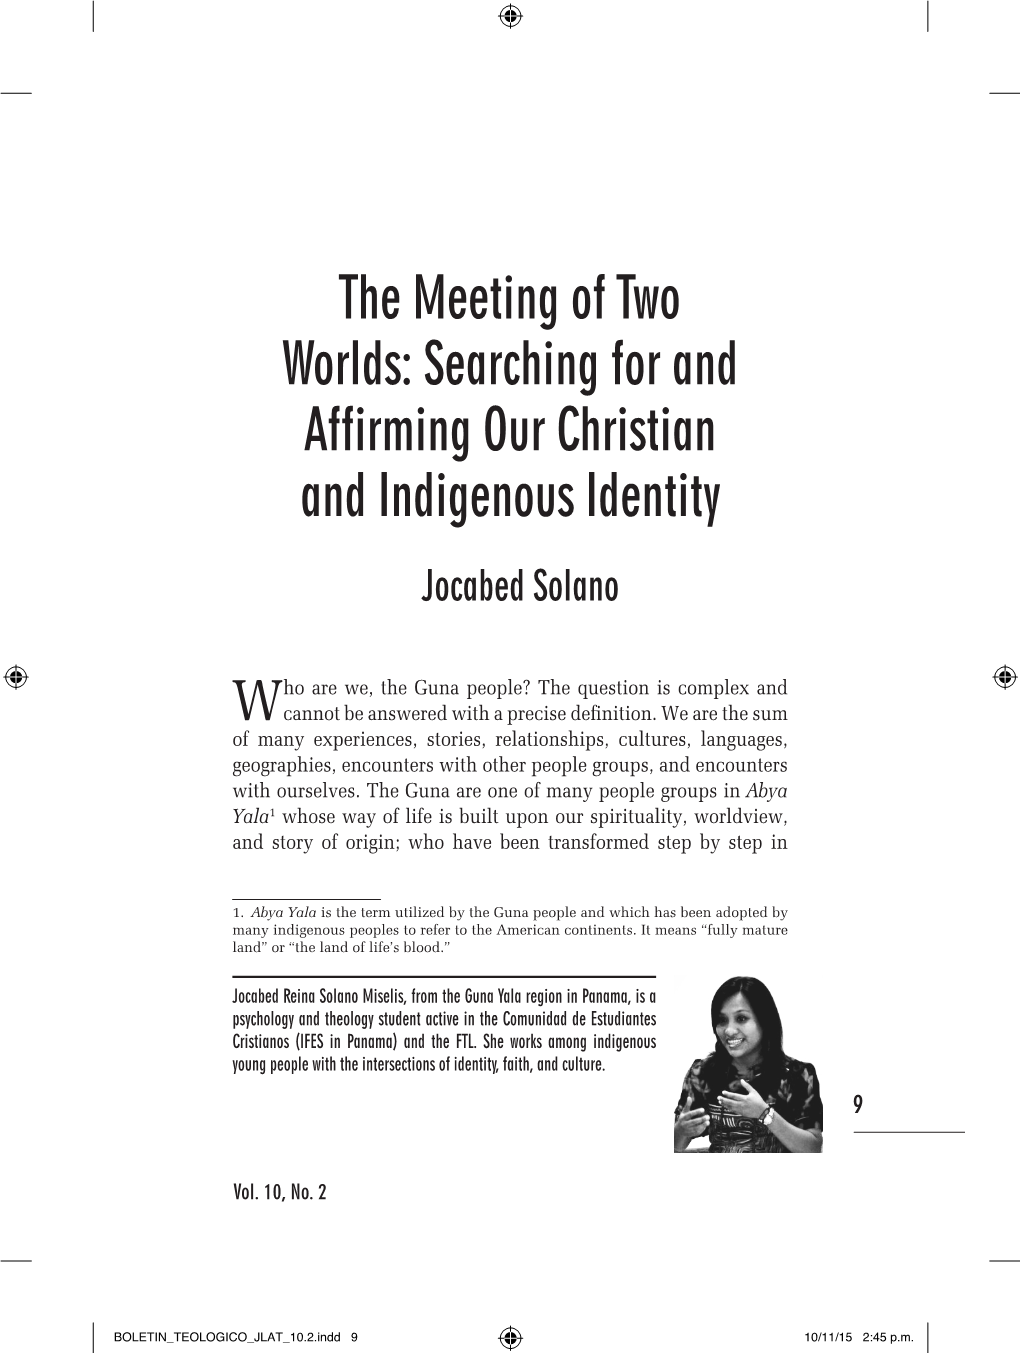 Searching for and Affirming Our Christian and Indigenous Identity Jocabed Solano